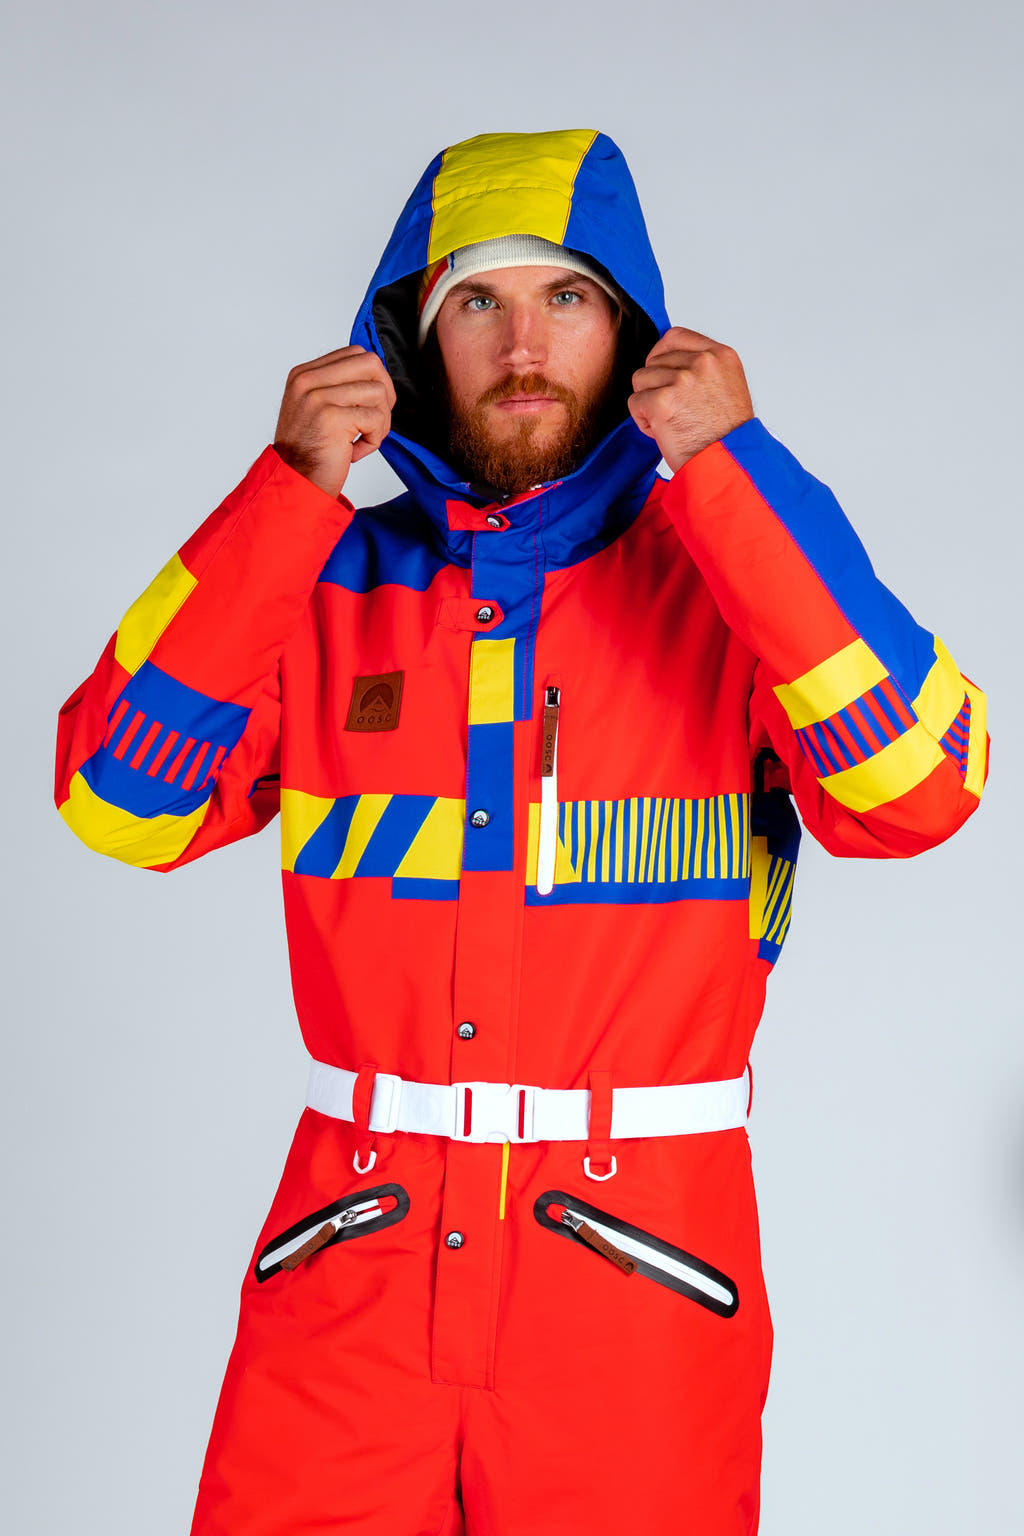 A man in a vintage ski suit, reminiscent of iconic weekends.